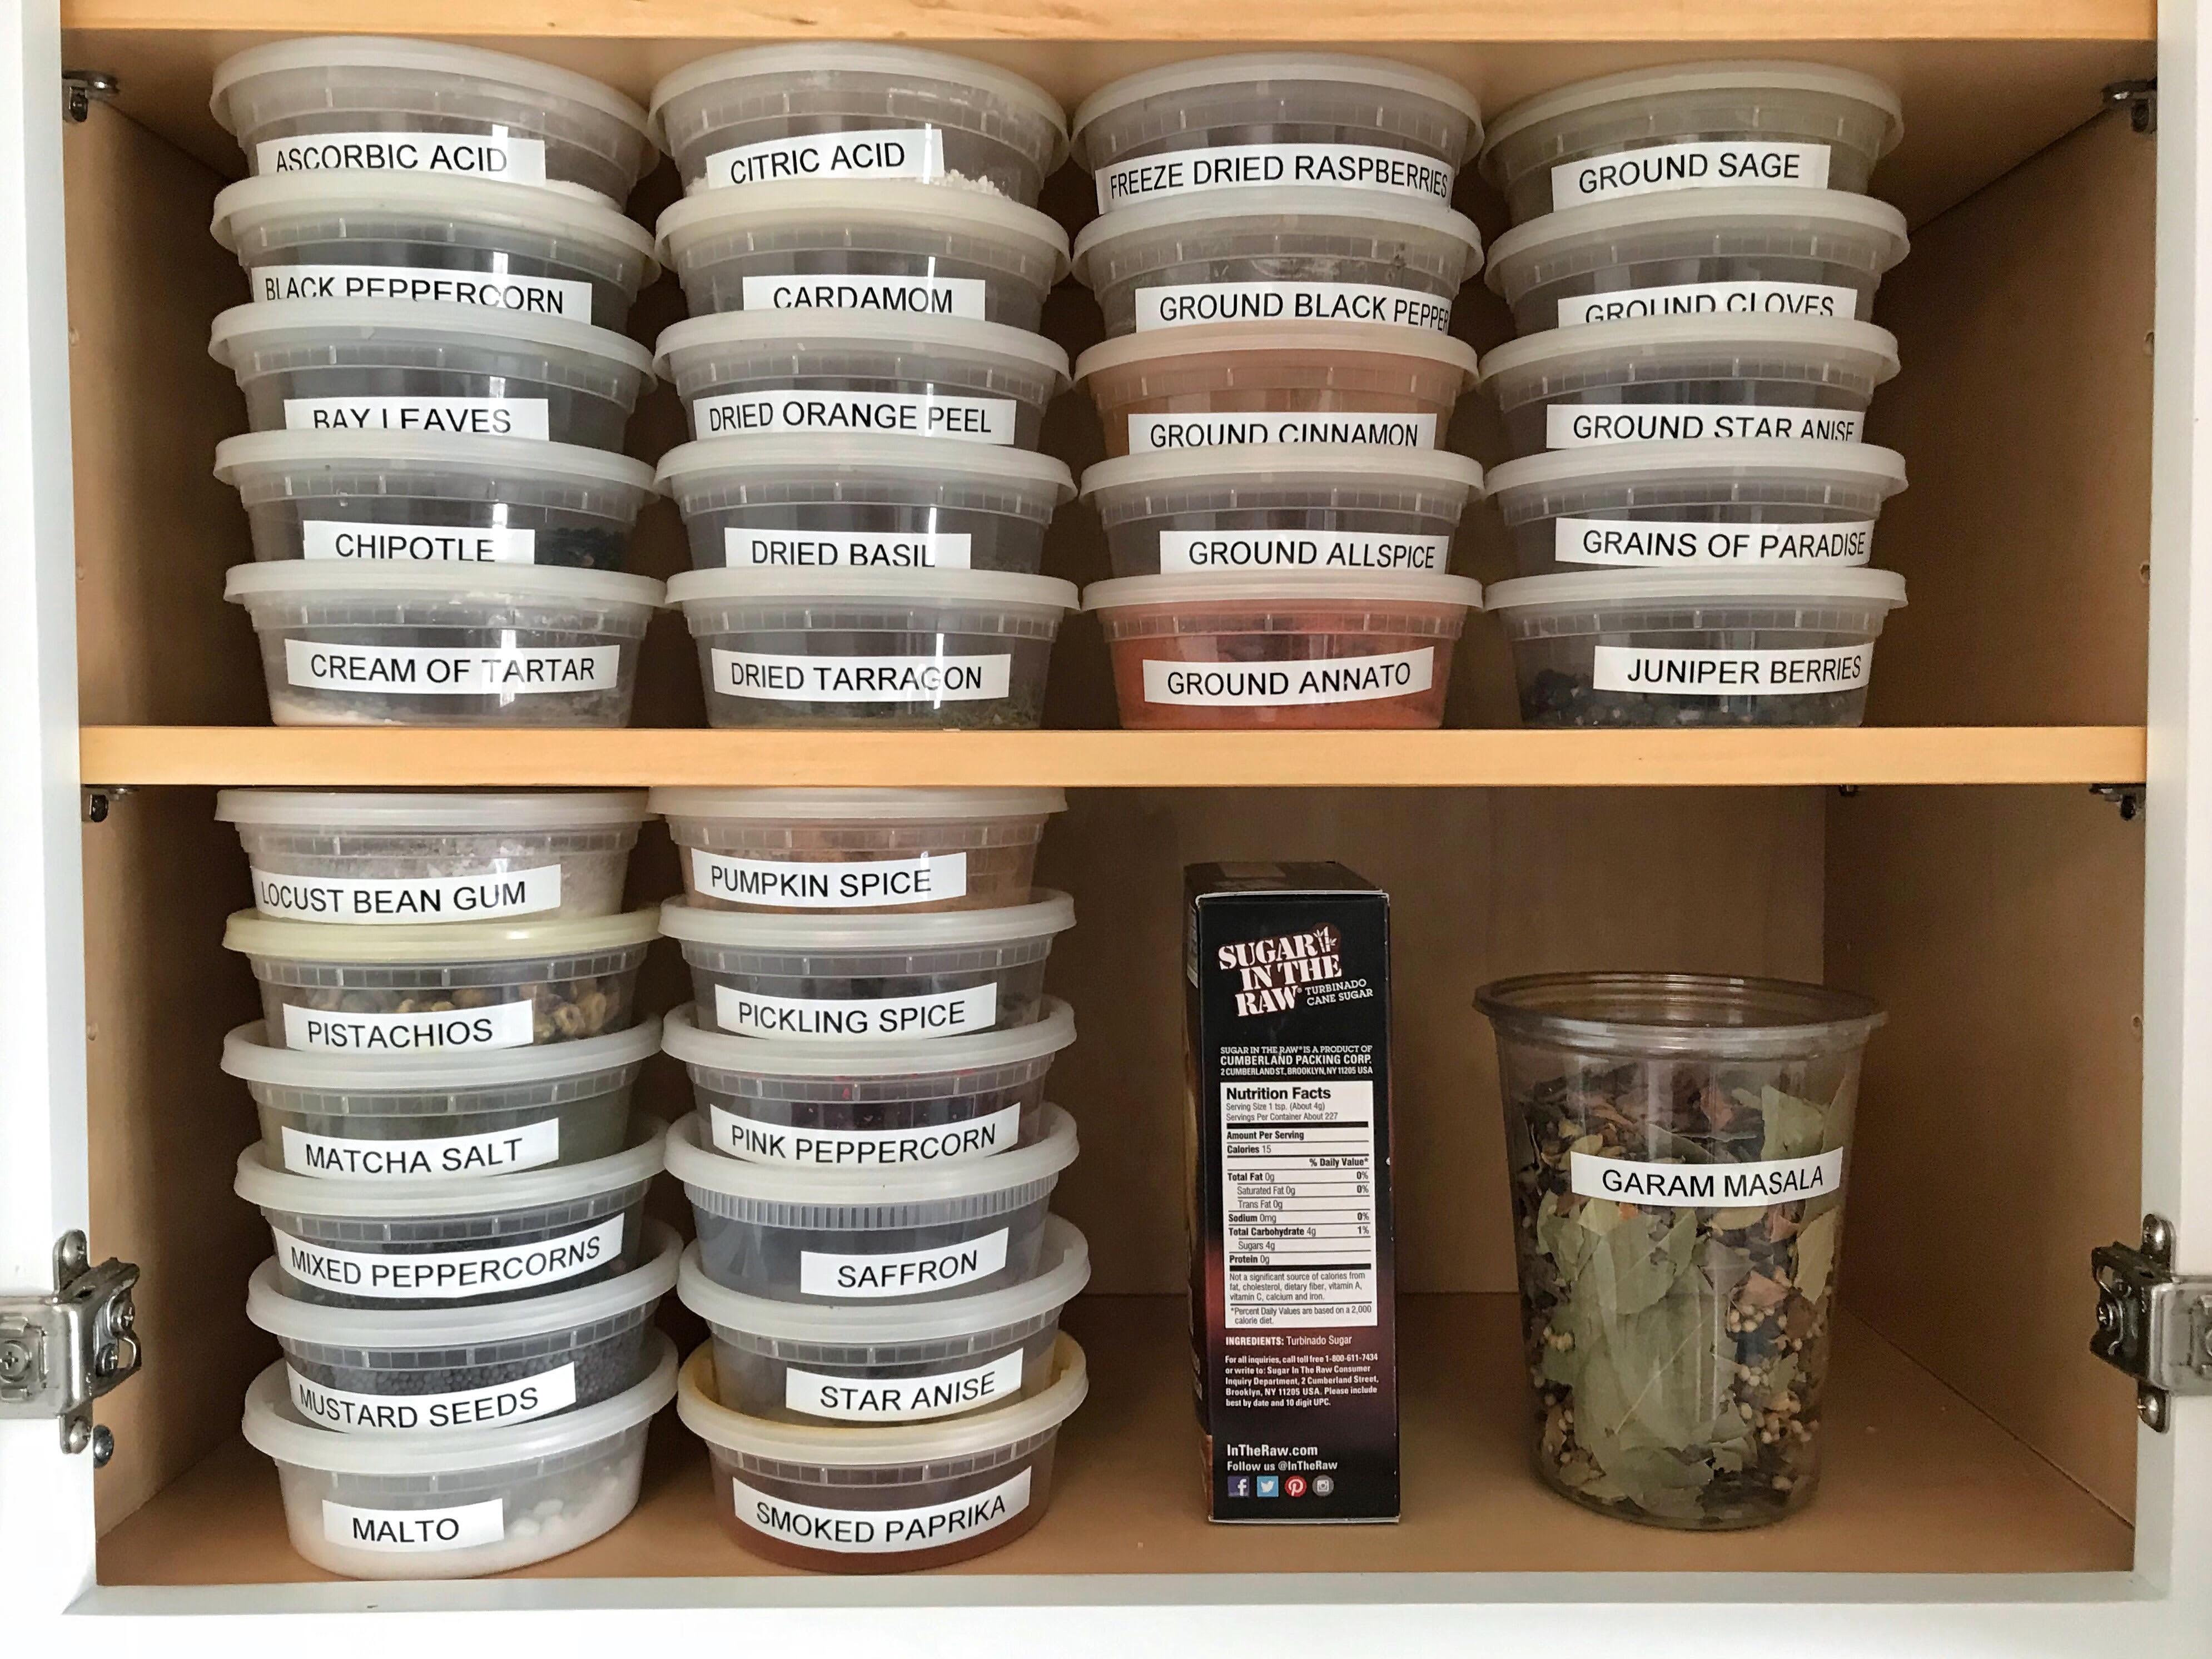 How Professional Chefs Organize Spices